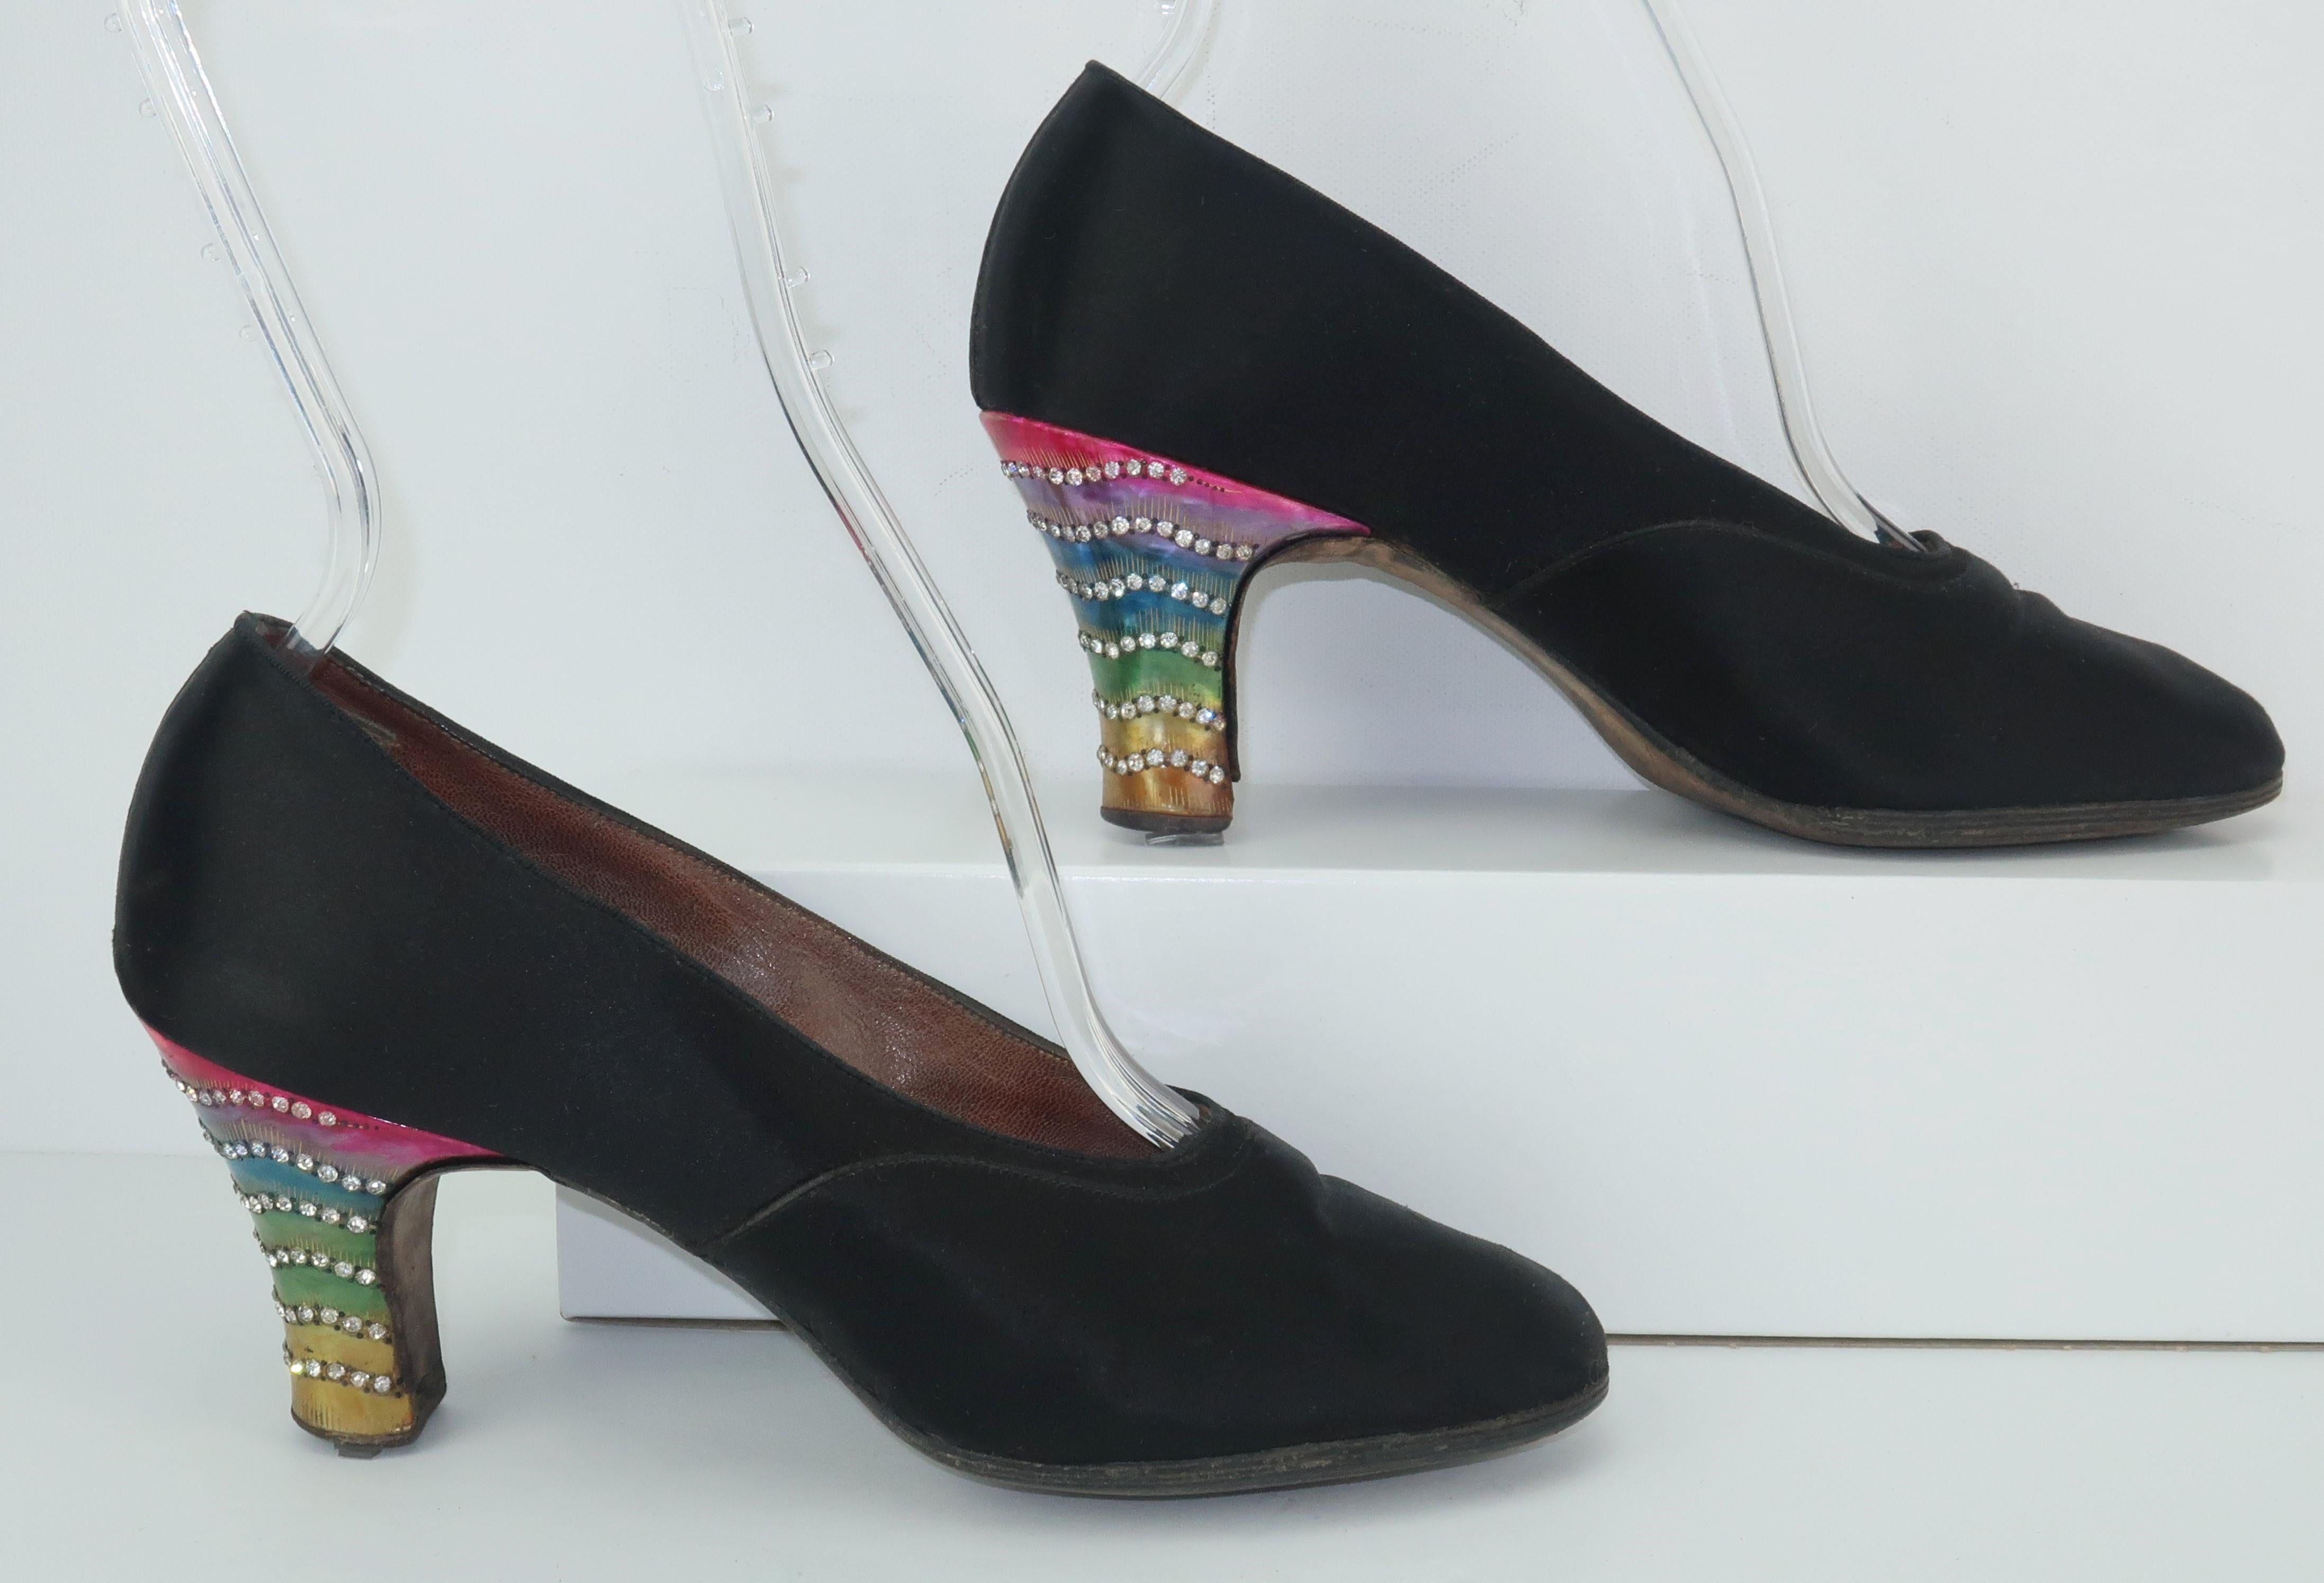 The celluloid heel is a remarkable piece of fashionable art from the past.  These 1920's black satin evening shoes are a flapper's delight with pearlized celluloid covered wooden heels in candy colors including fuchsia, lavender, peacock blue, green